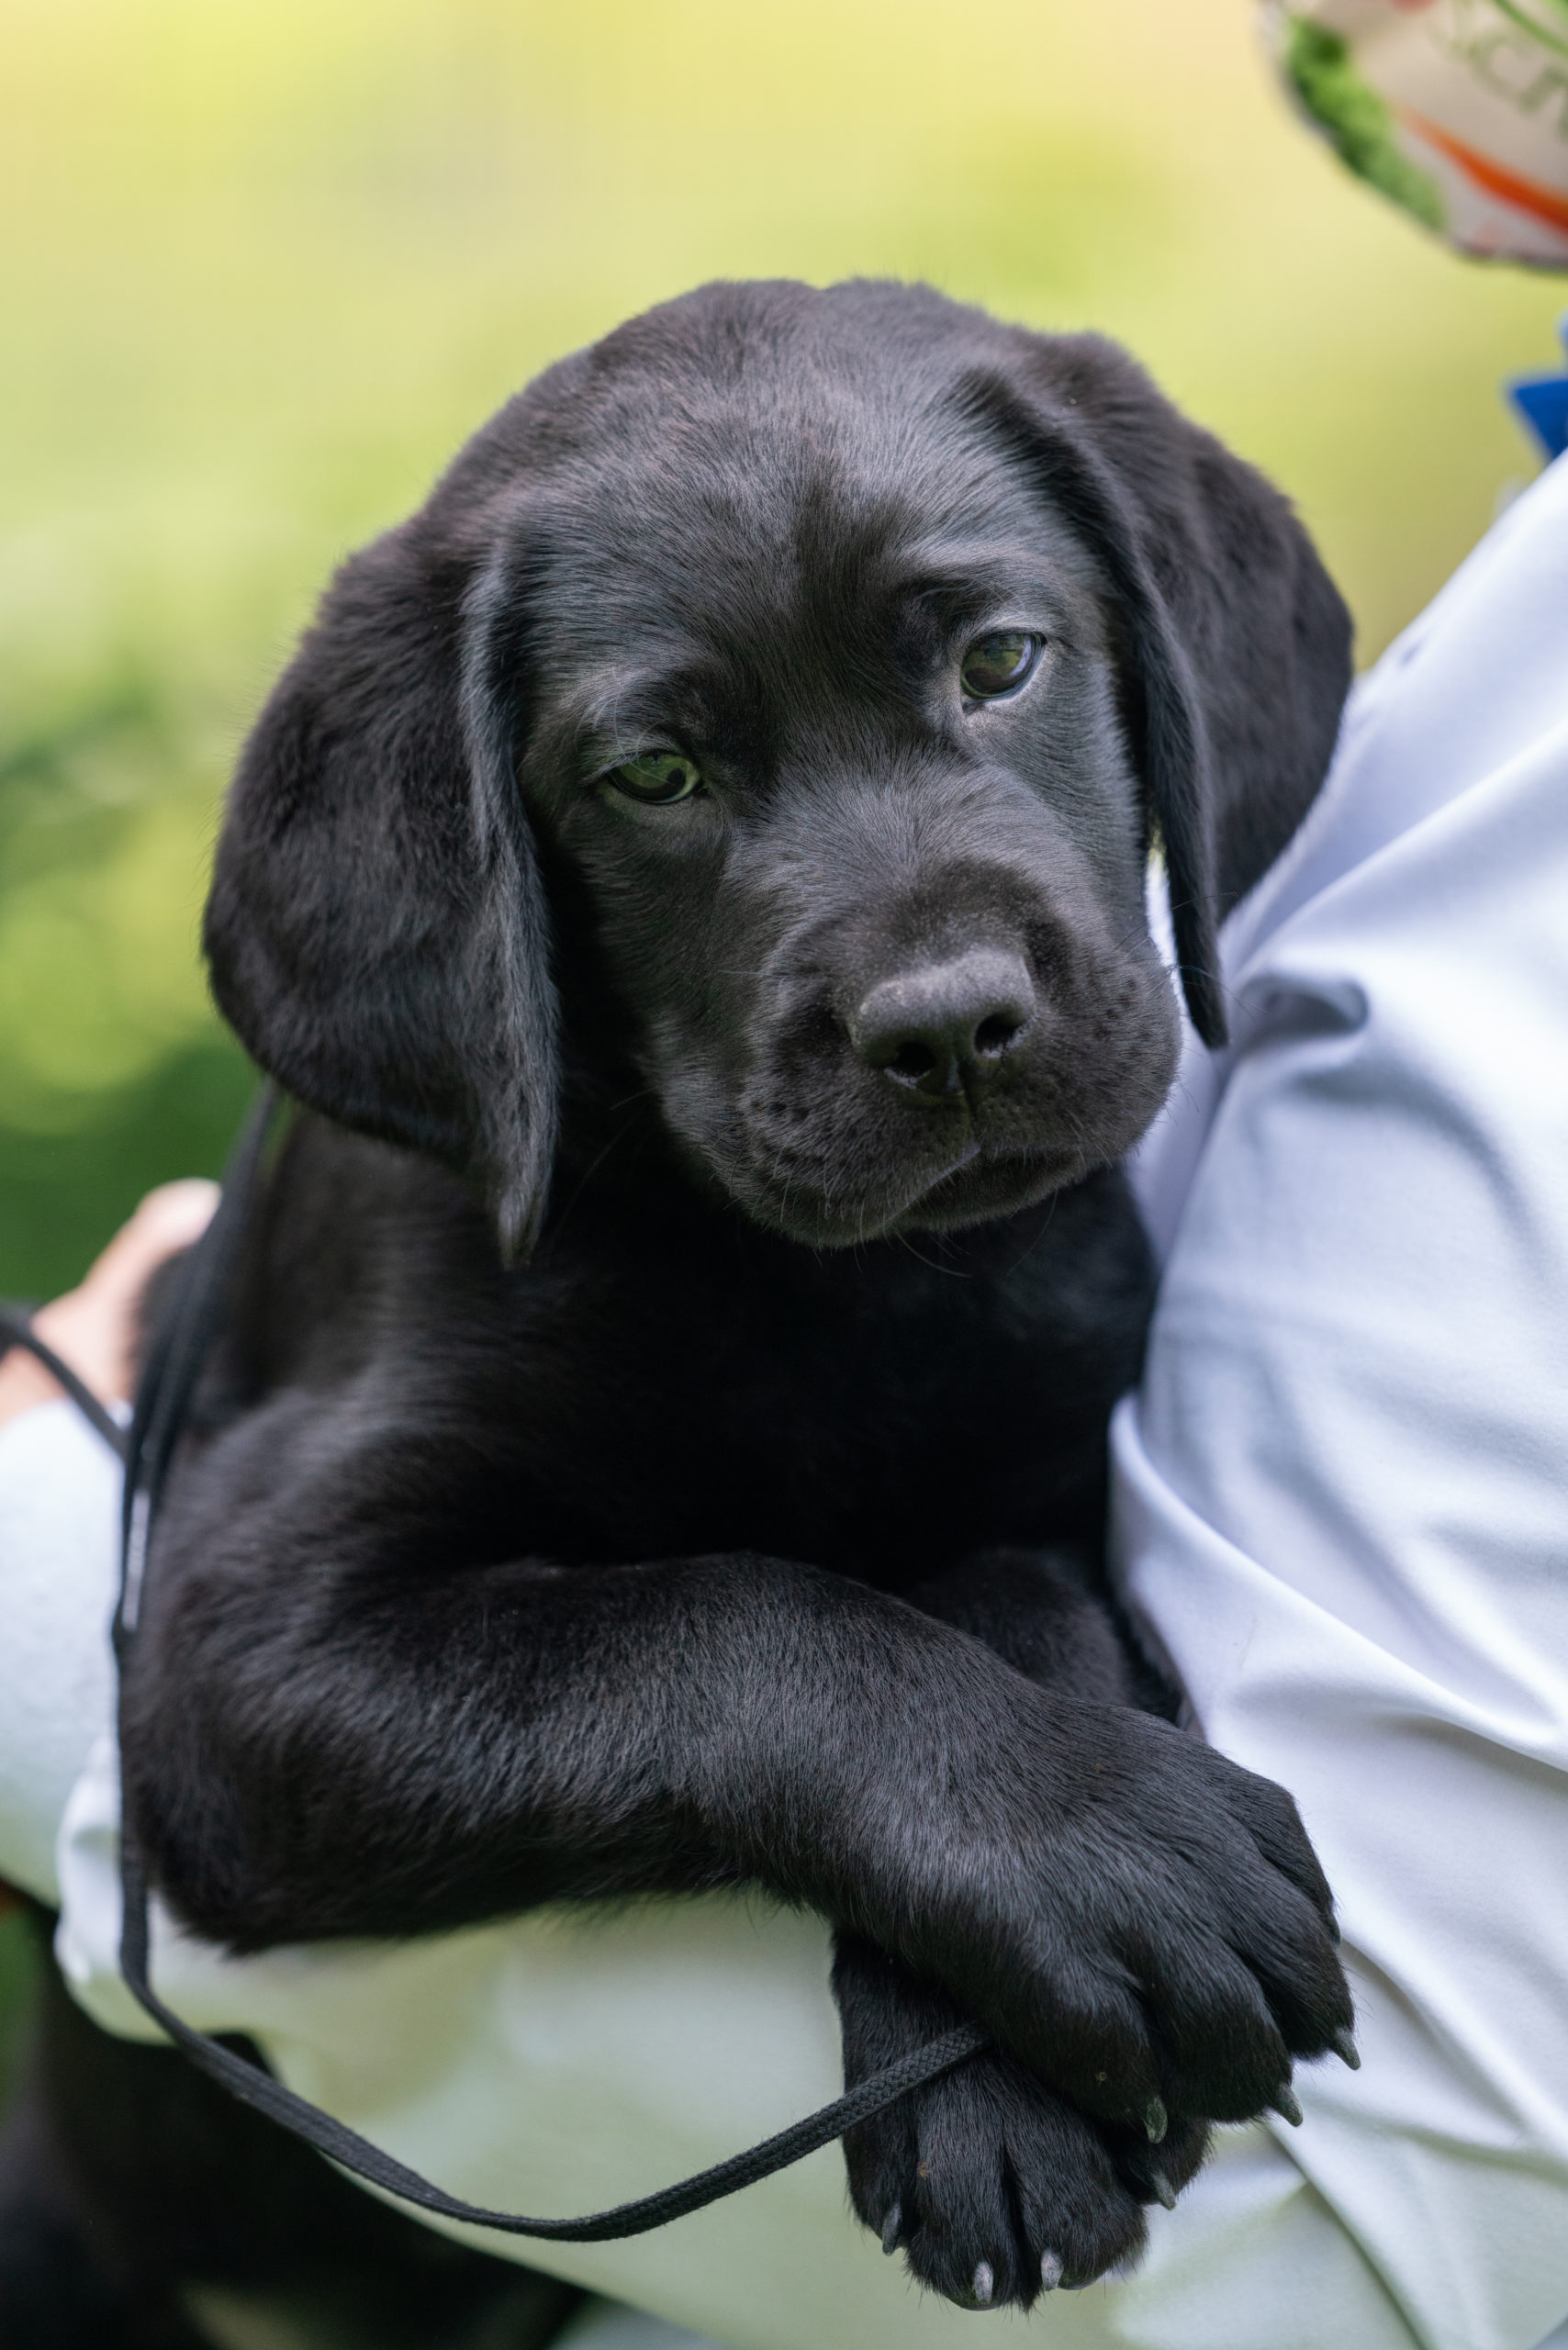 A cute black Labrador puppy being held closely by a puppy raiser.